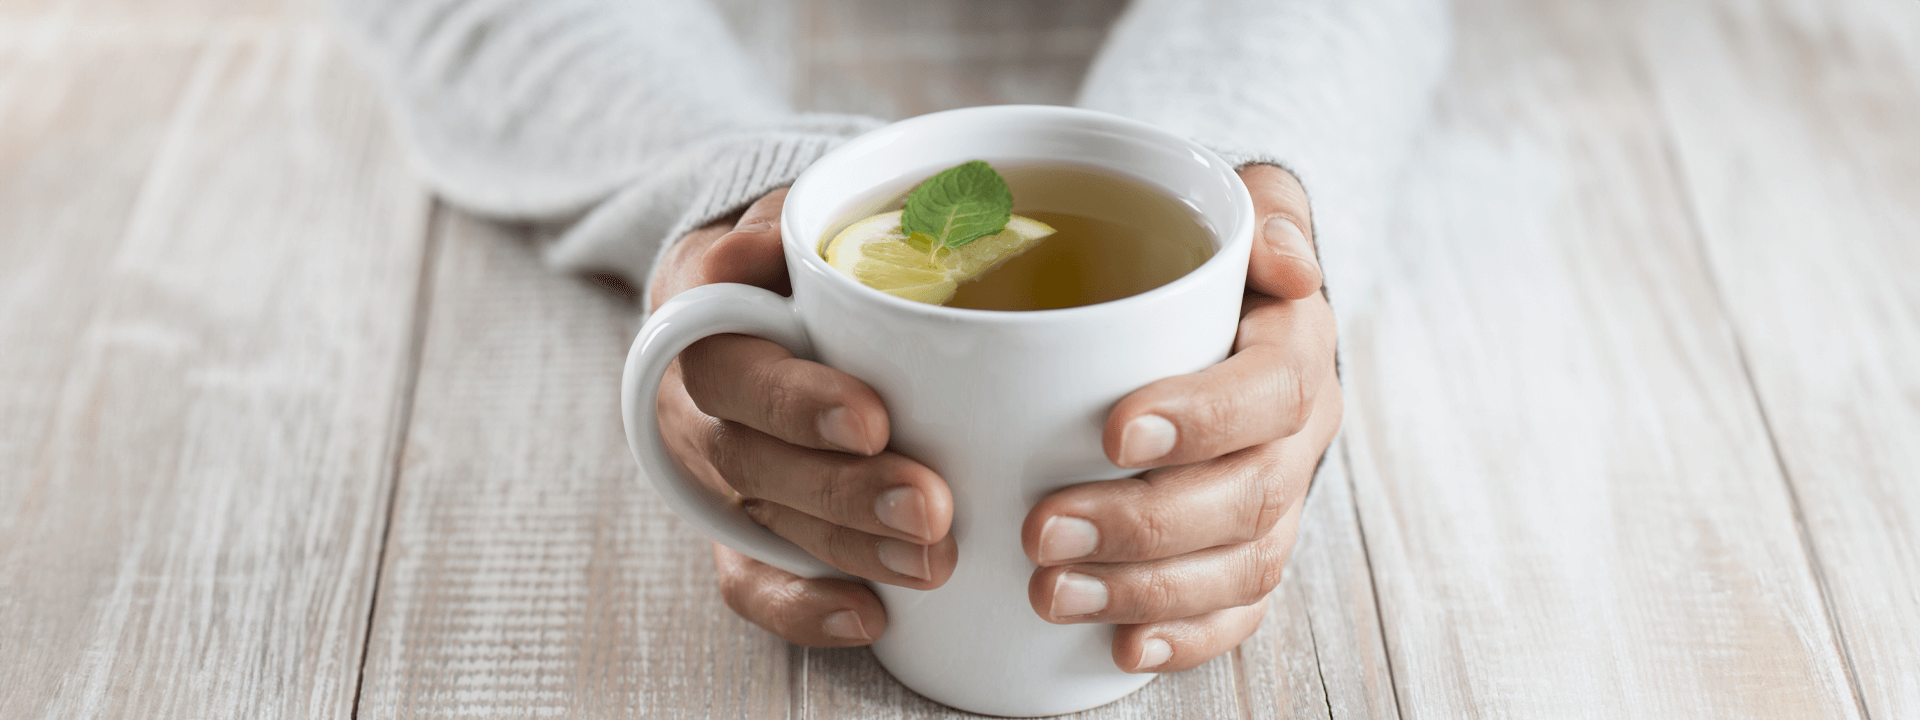 A Guide To Boosting Immunity This Winter